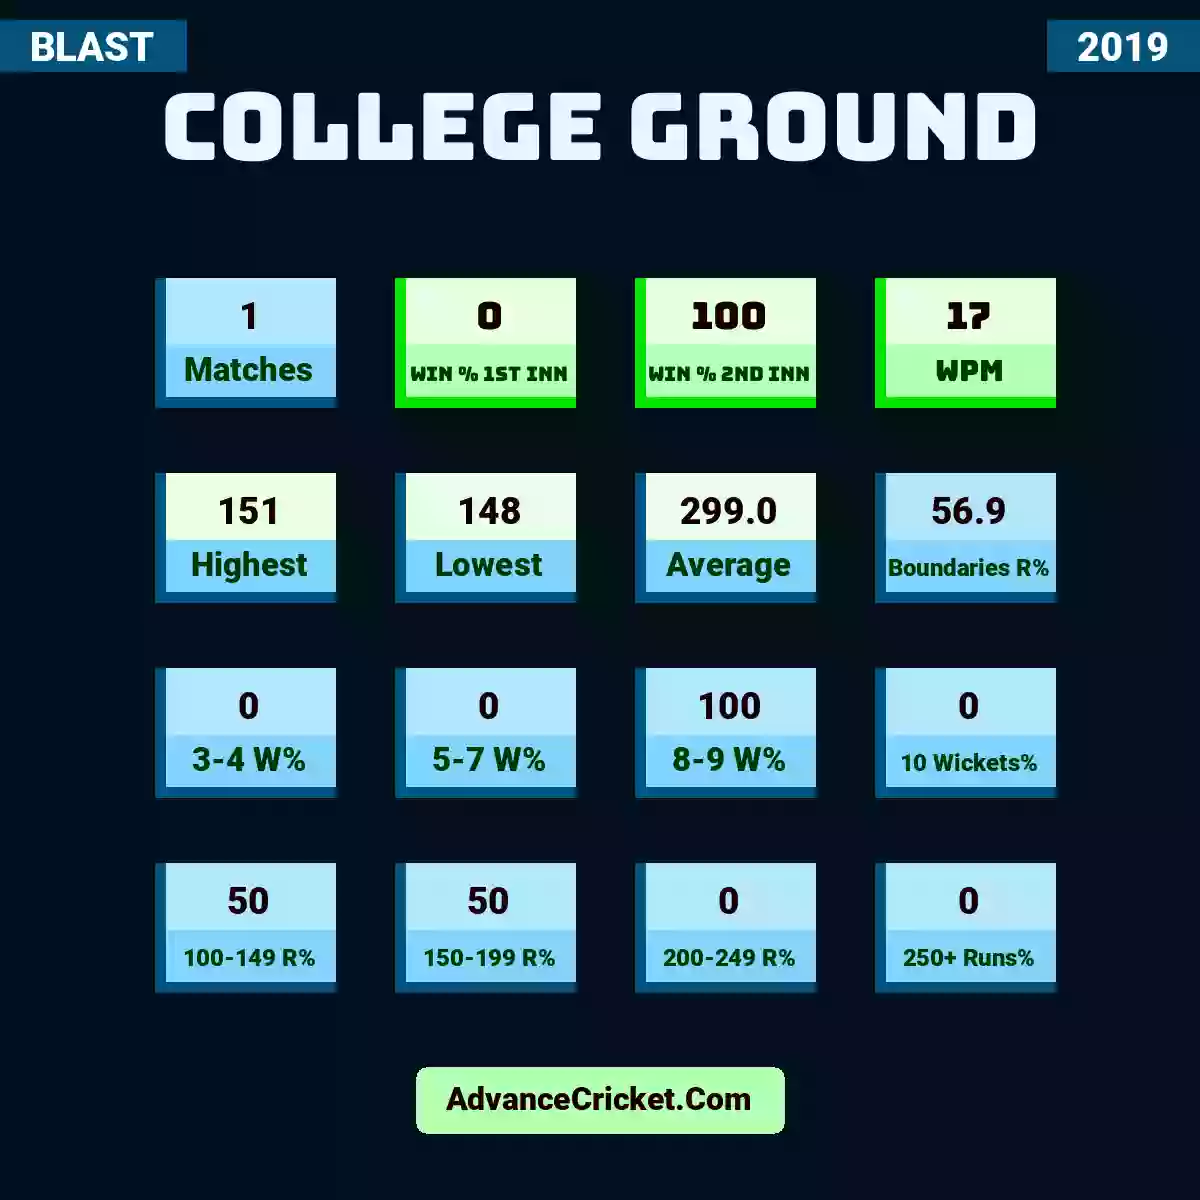 Image showing College Ground with Matches: 1, Win % 1st Inn: 0, Win % 2nd Inn: 100, WPM: 17, Highest: 151, Lowest: 148, Average: 299.0, Boundaries R%: 56.9, 3-4 W%: 0, 5-7 W%: 0, 8-9 W%: 100, 10 Wickets%: 0, 100-149 R%: 50, 150-199 R%: 50, 200-249 R%: 0, 250+ Runs%: 0.